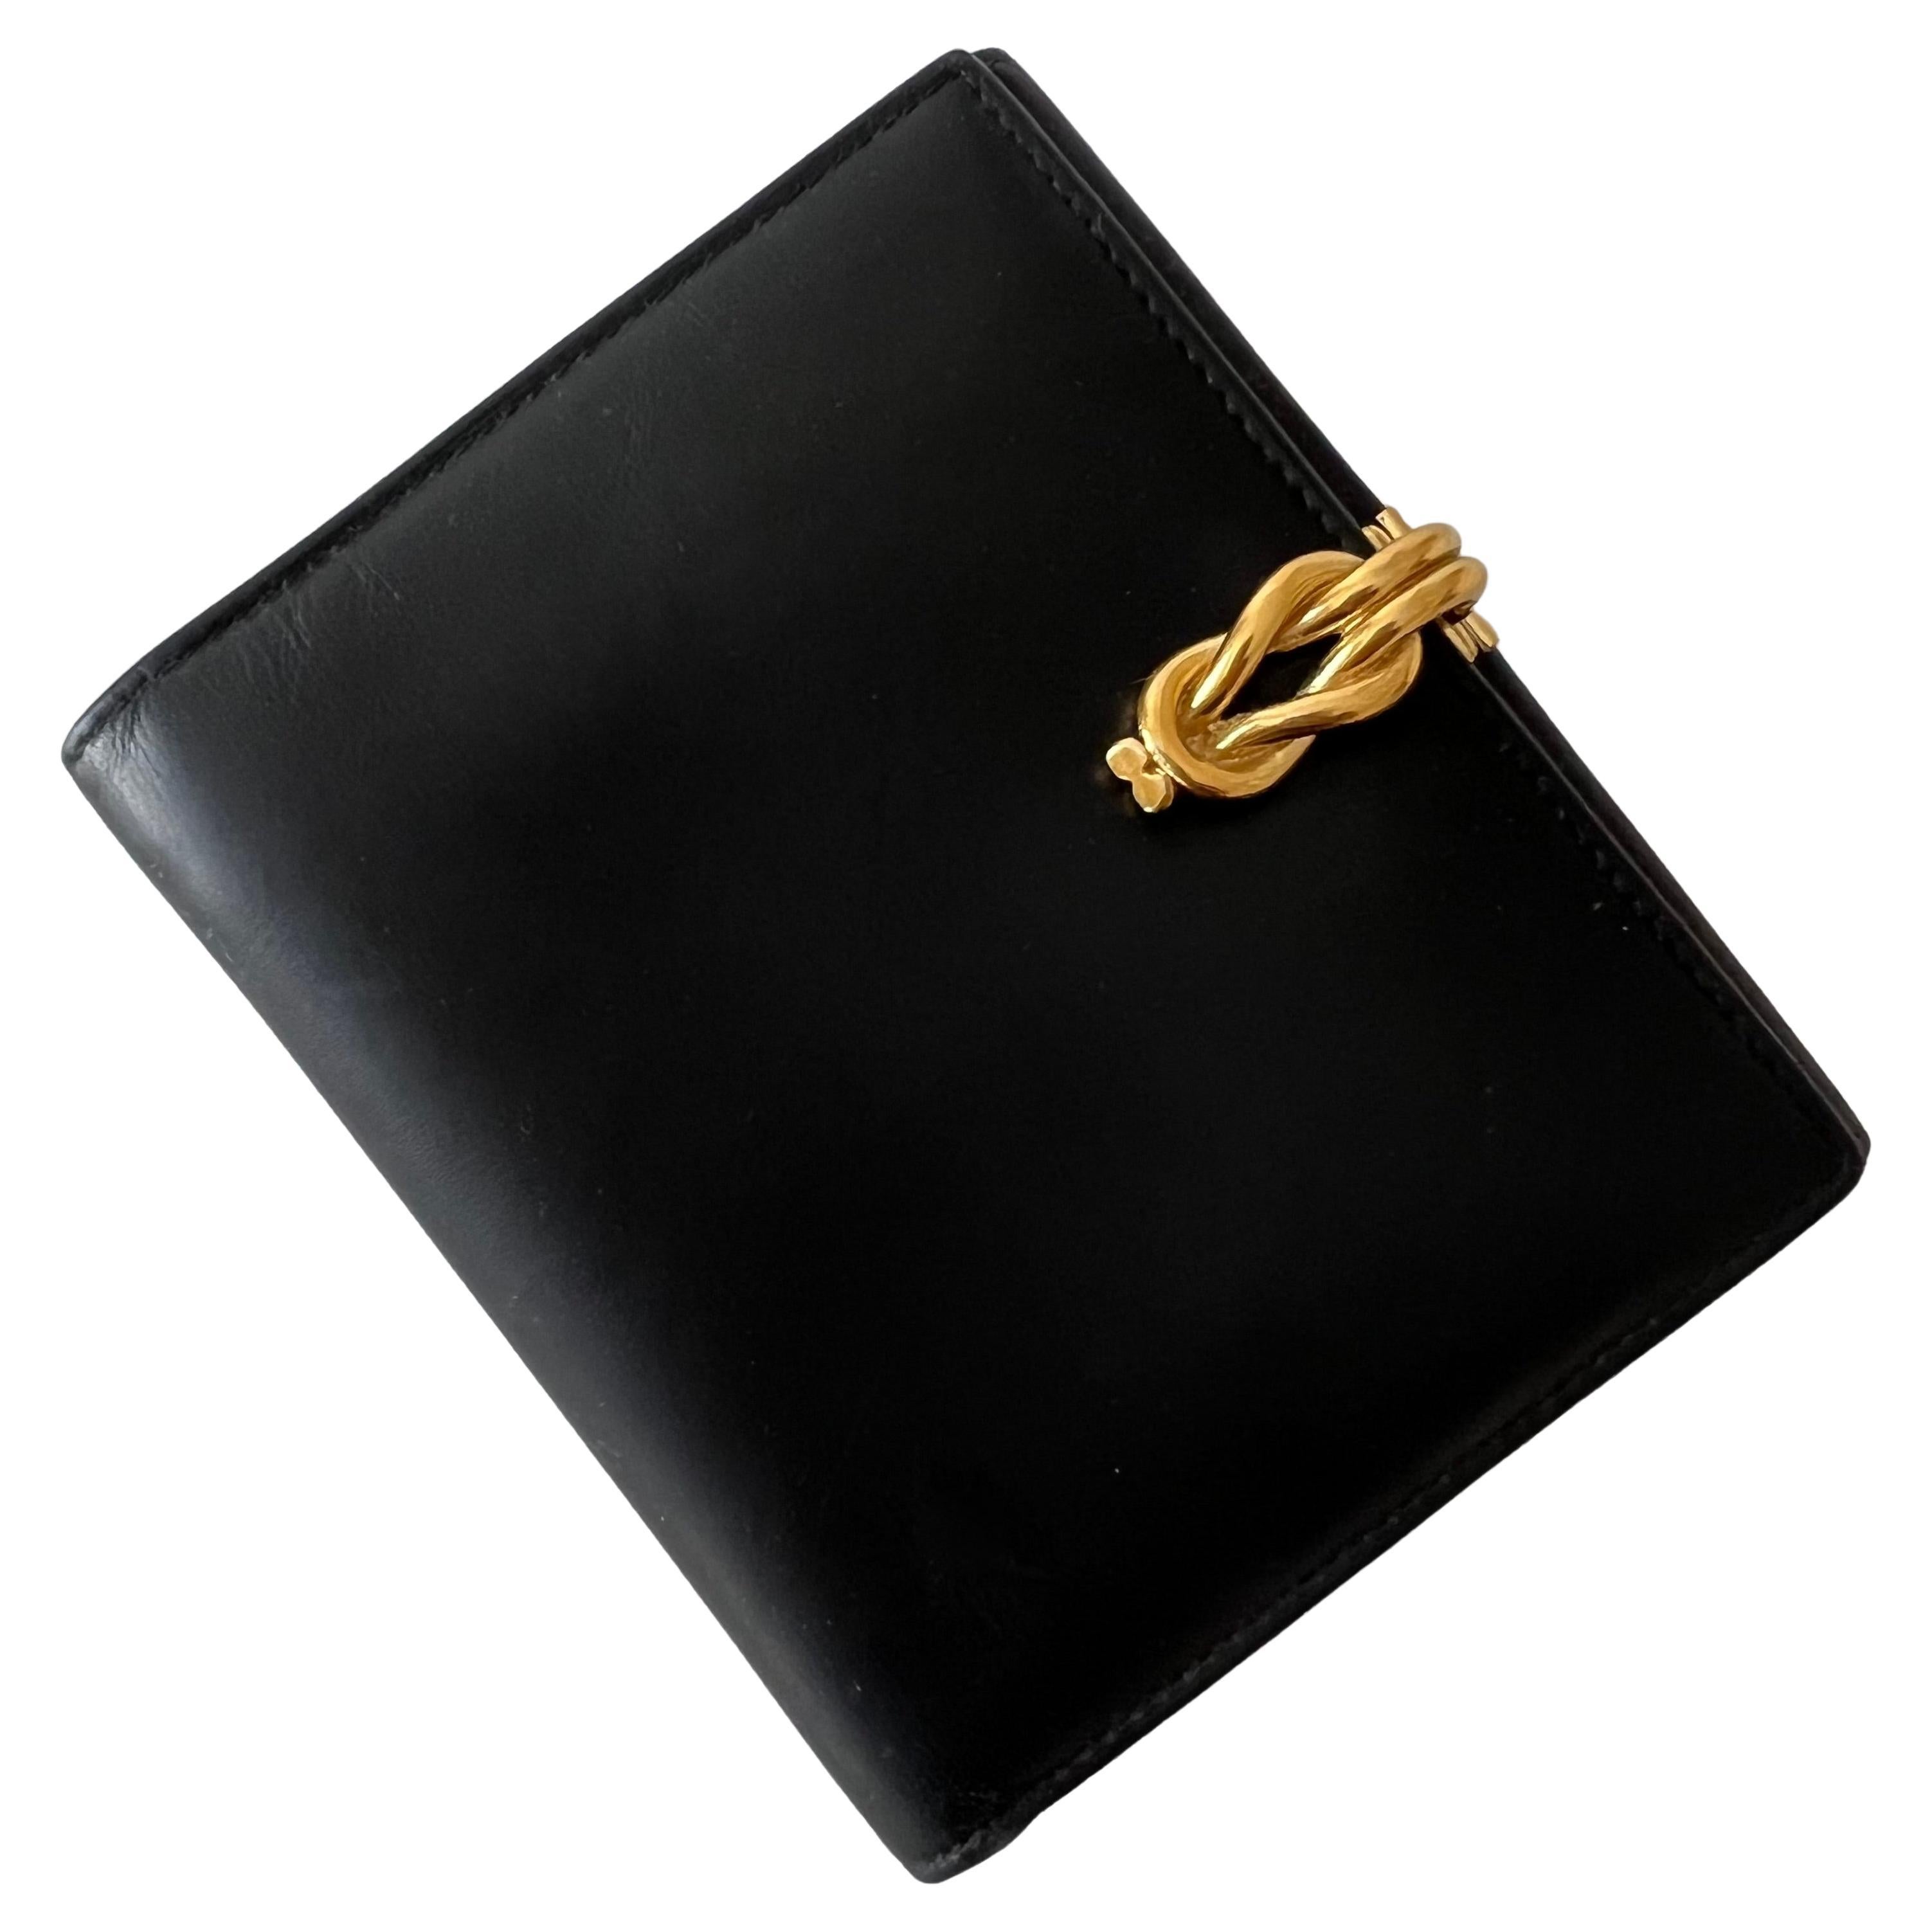 Gucci Italian Leather Wallet with Gold Knott Closure and Coin Holder